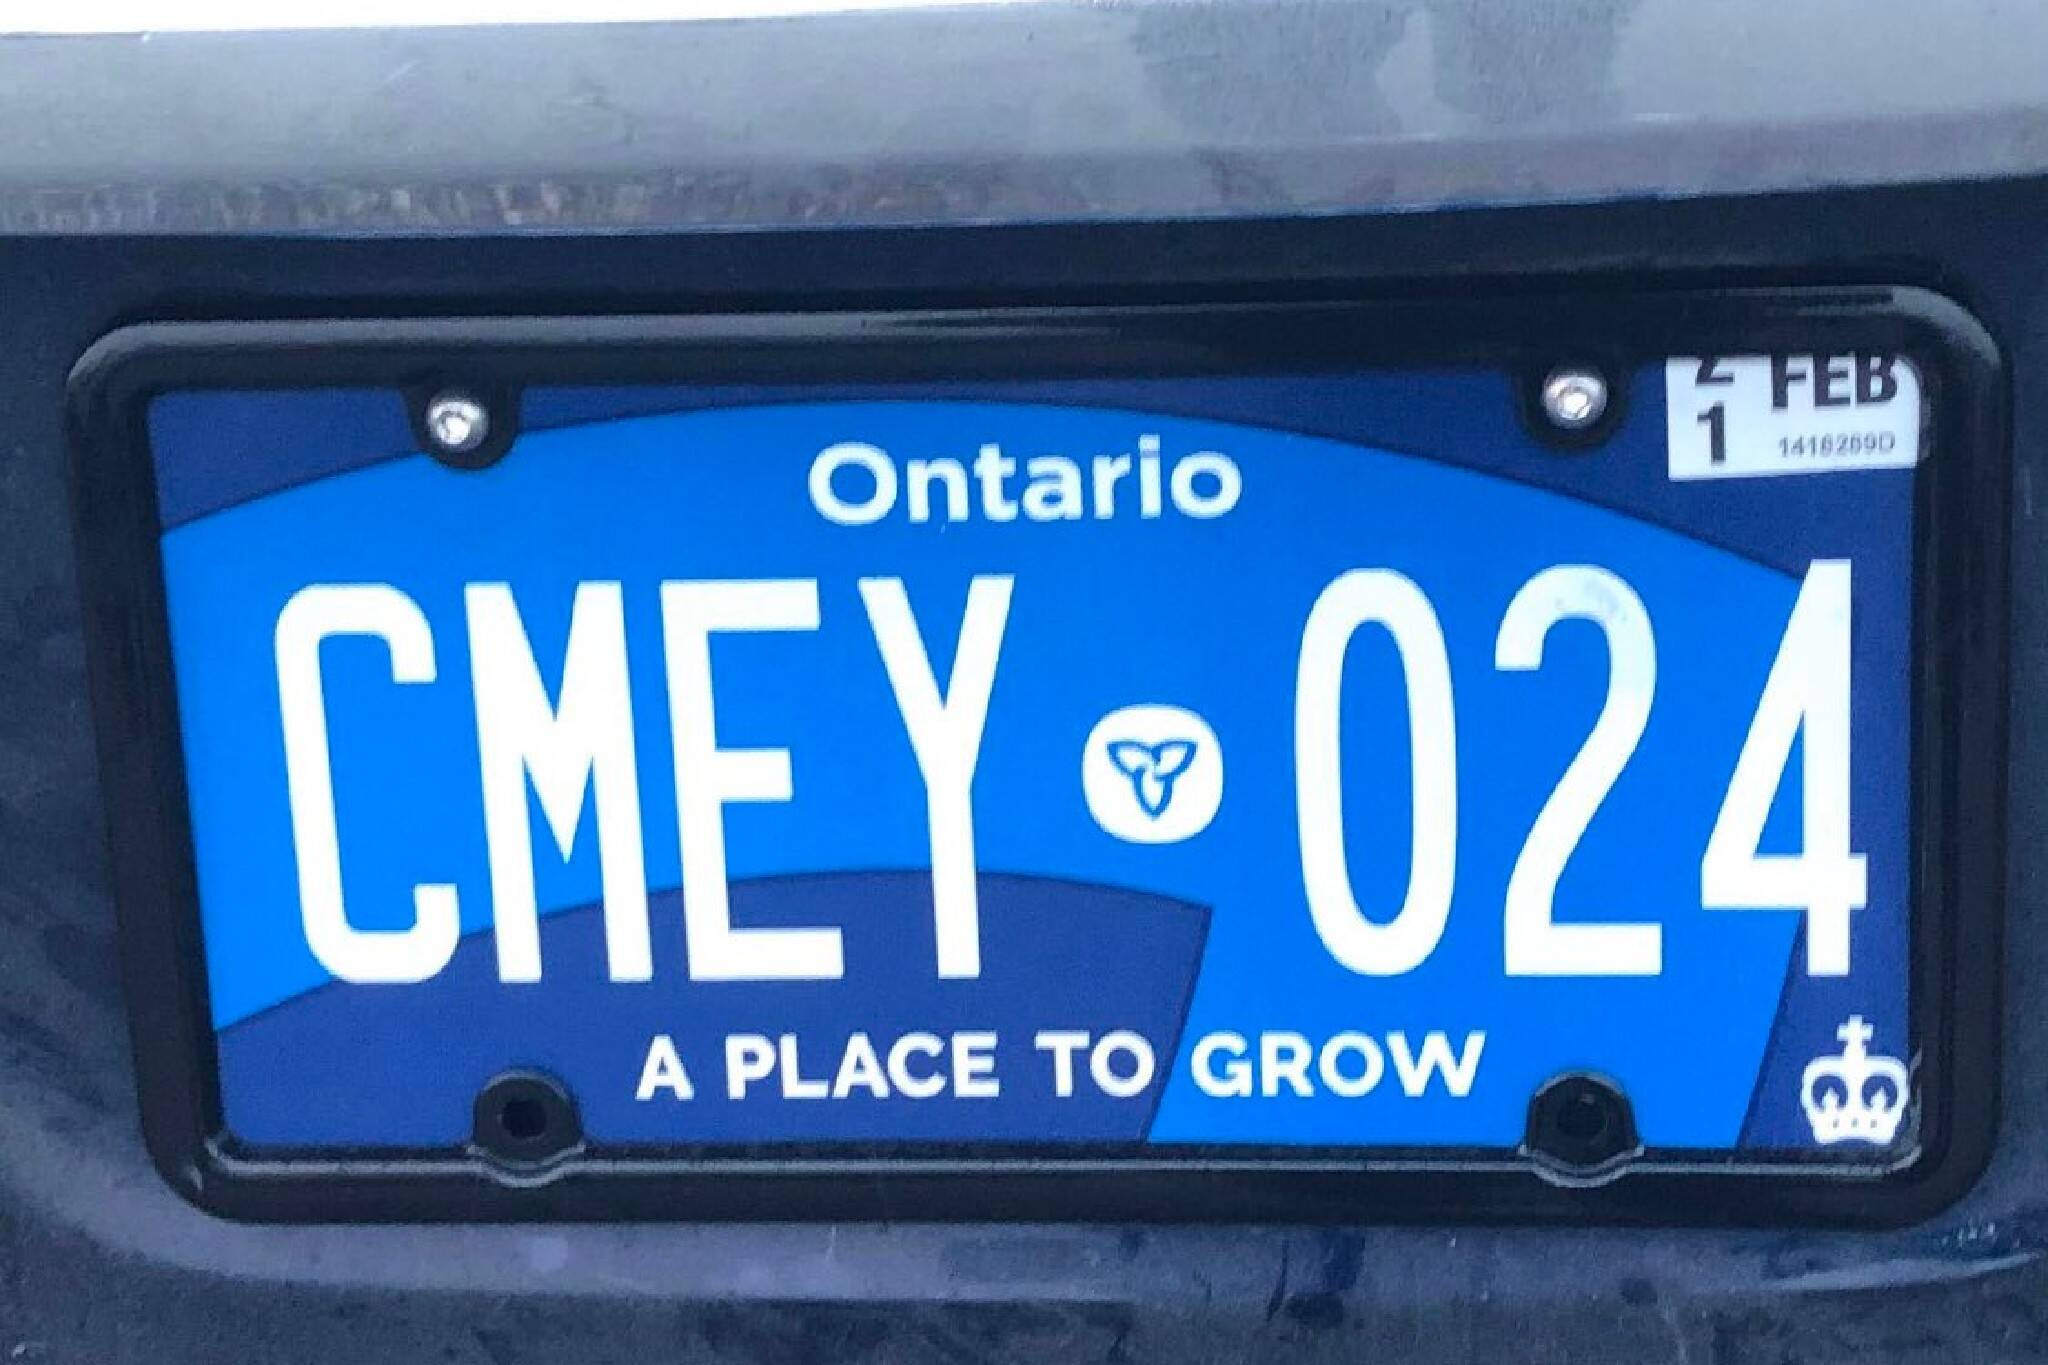 new ontario license plate